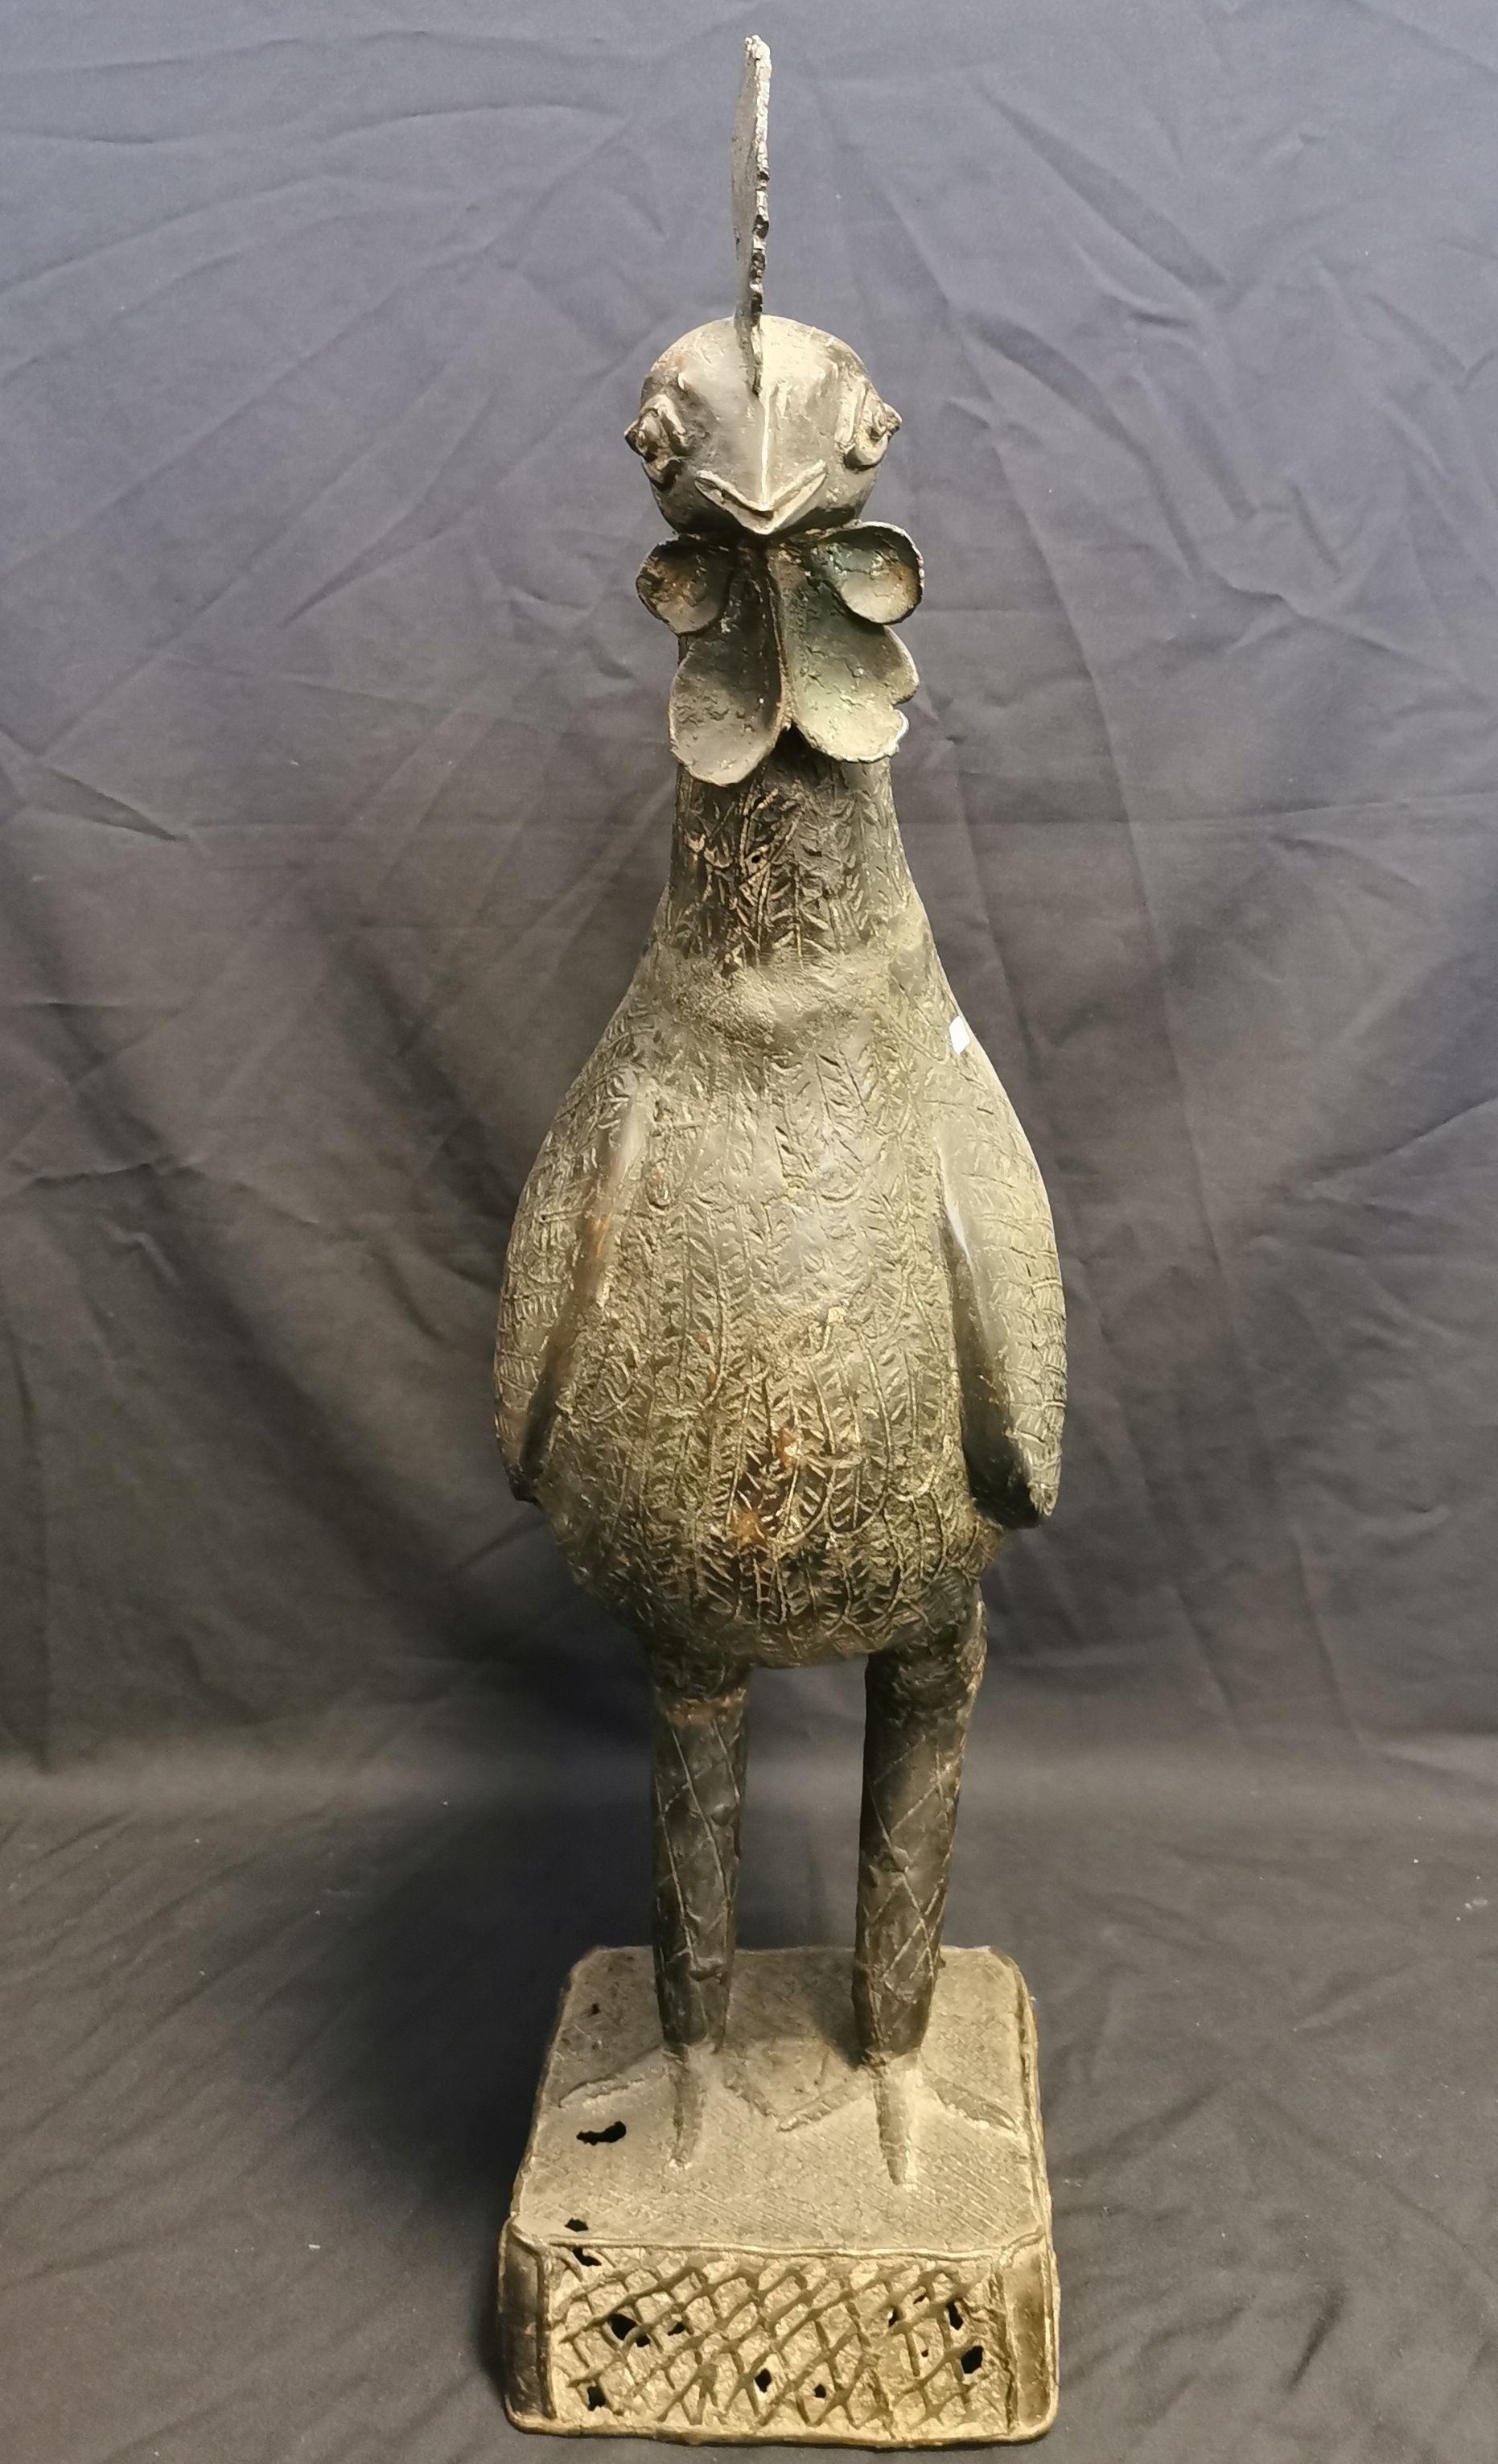 ANIMAL SCULPTURE "ROOSTER" - Image 2 of 4